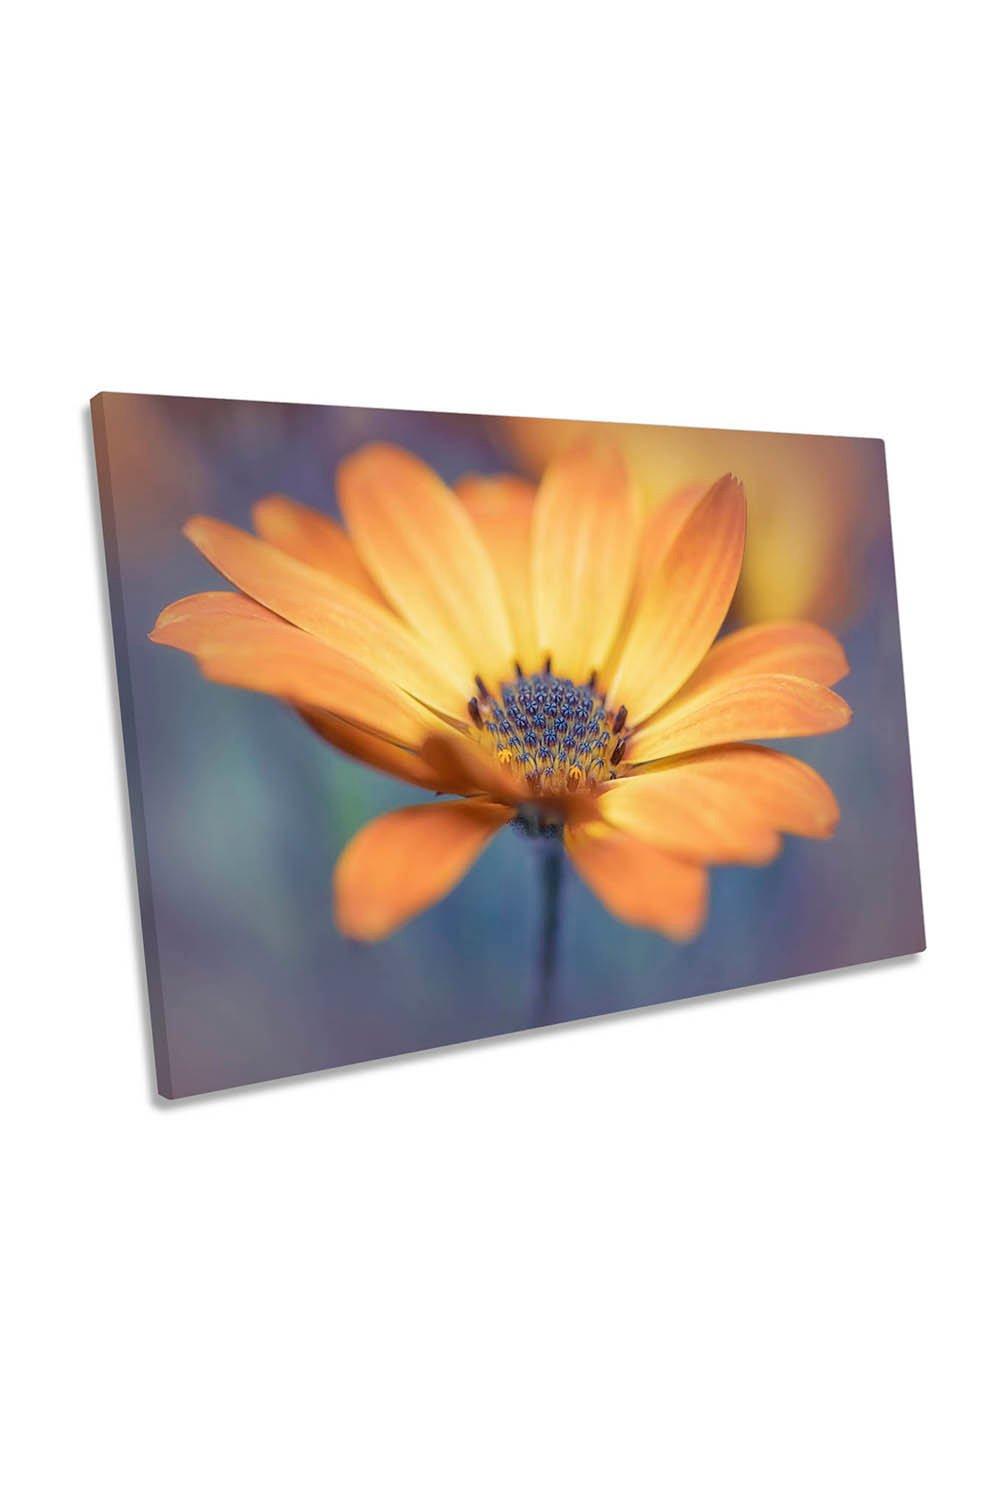 Orange Delight Daisy Flower Floral Canvas Wall Art Picture Print